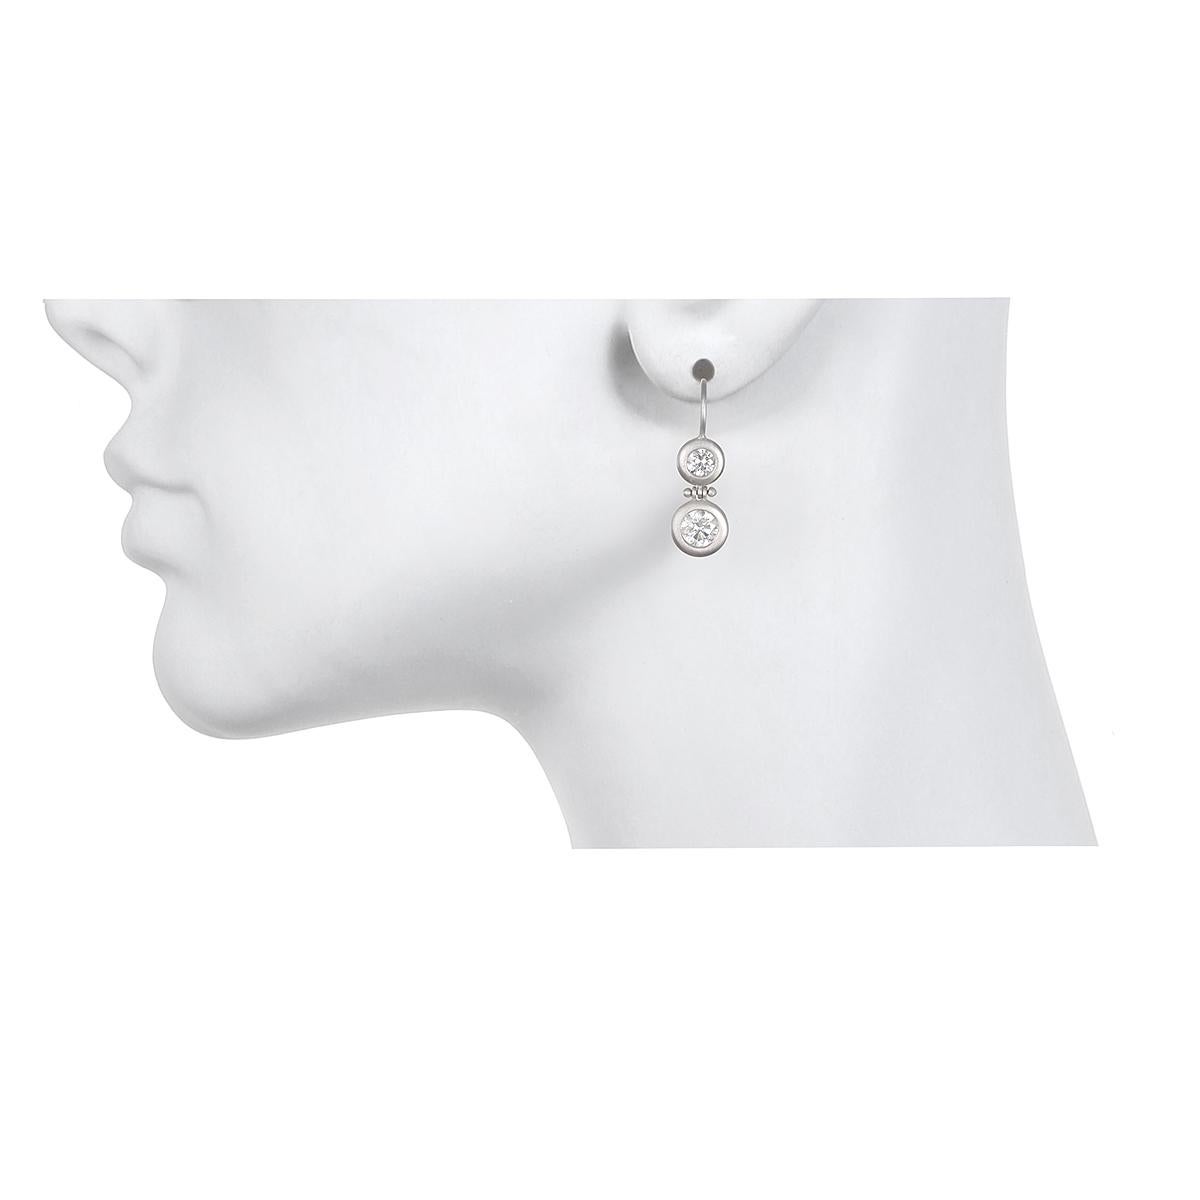 Effortlessly transition from simple and chic for every day to special occasion evening wear. 

Handcrafted in Platinum and matte finished, these double round brilliant cut diamonds are paired together for a classic yet modern look. The hinged ear